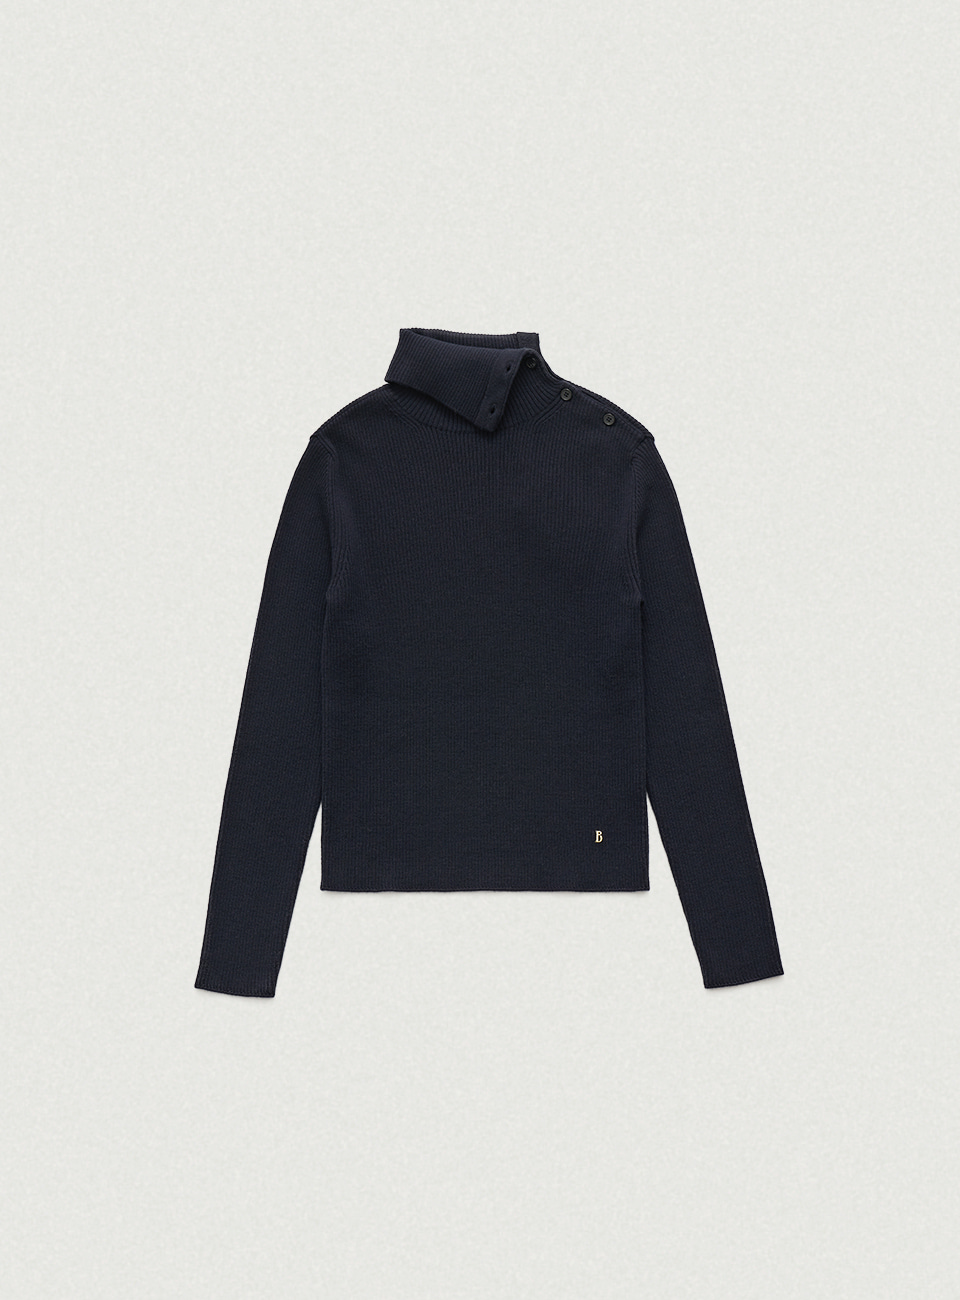 Navy Buttoned Turtleneck Knit Sweater - The Barnnet